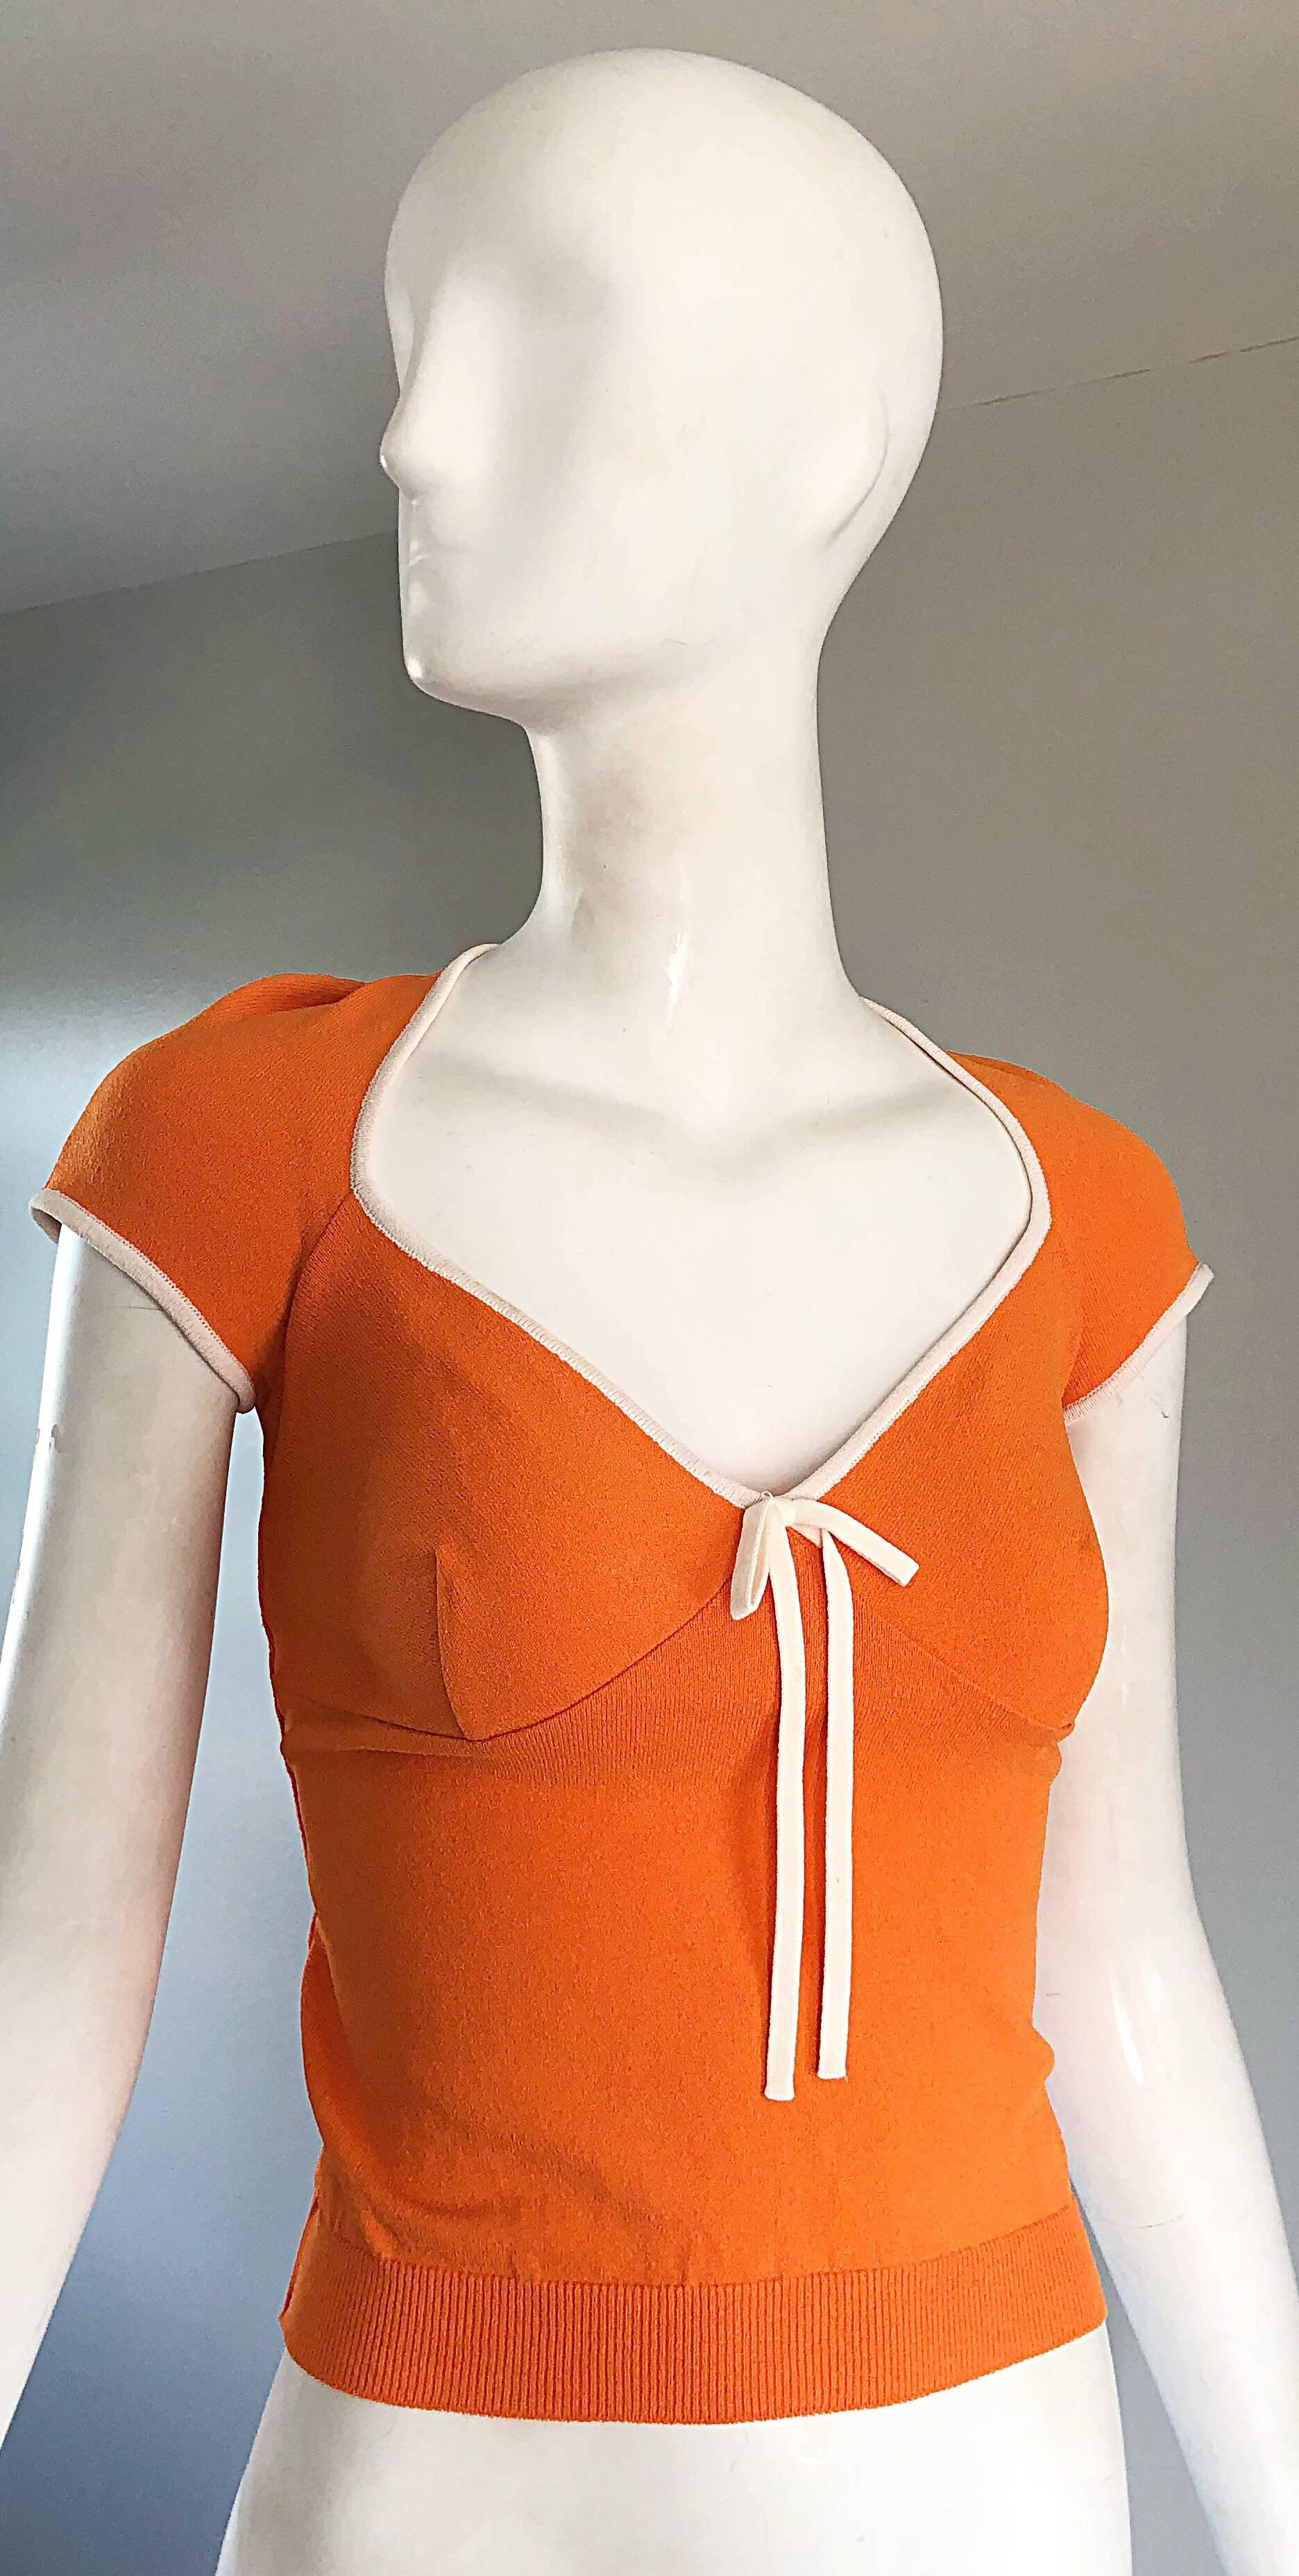 1990s Moschino Cheap & Chic Orange + White Vintage Cap Sleeve 90s Blouse Top 3